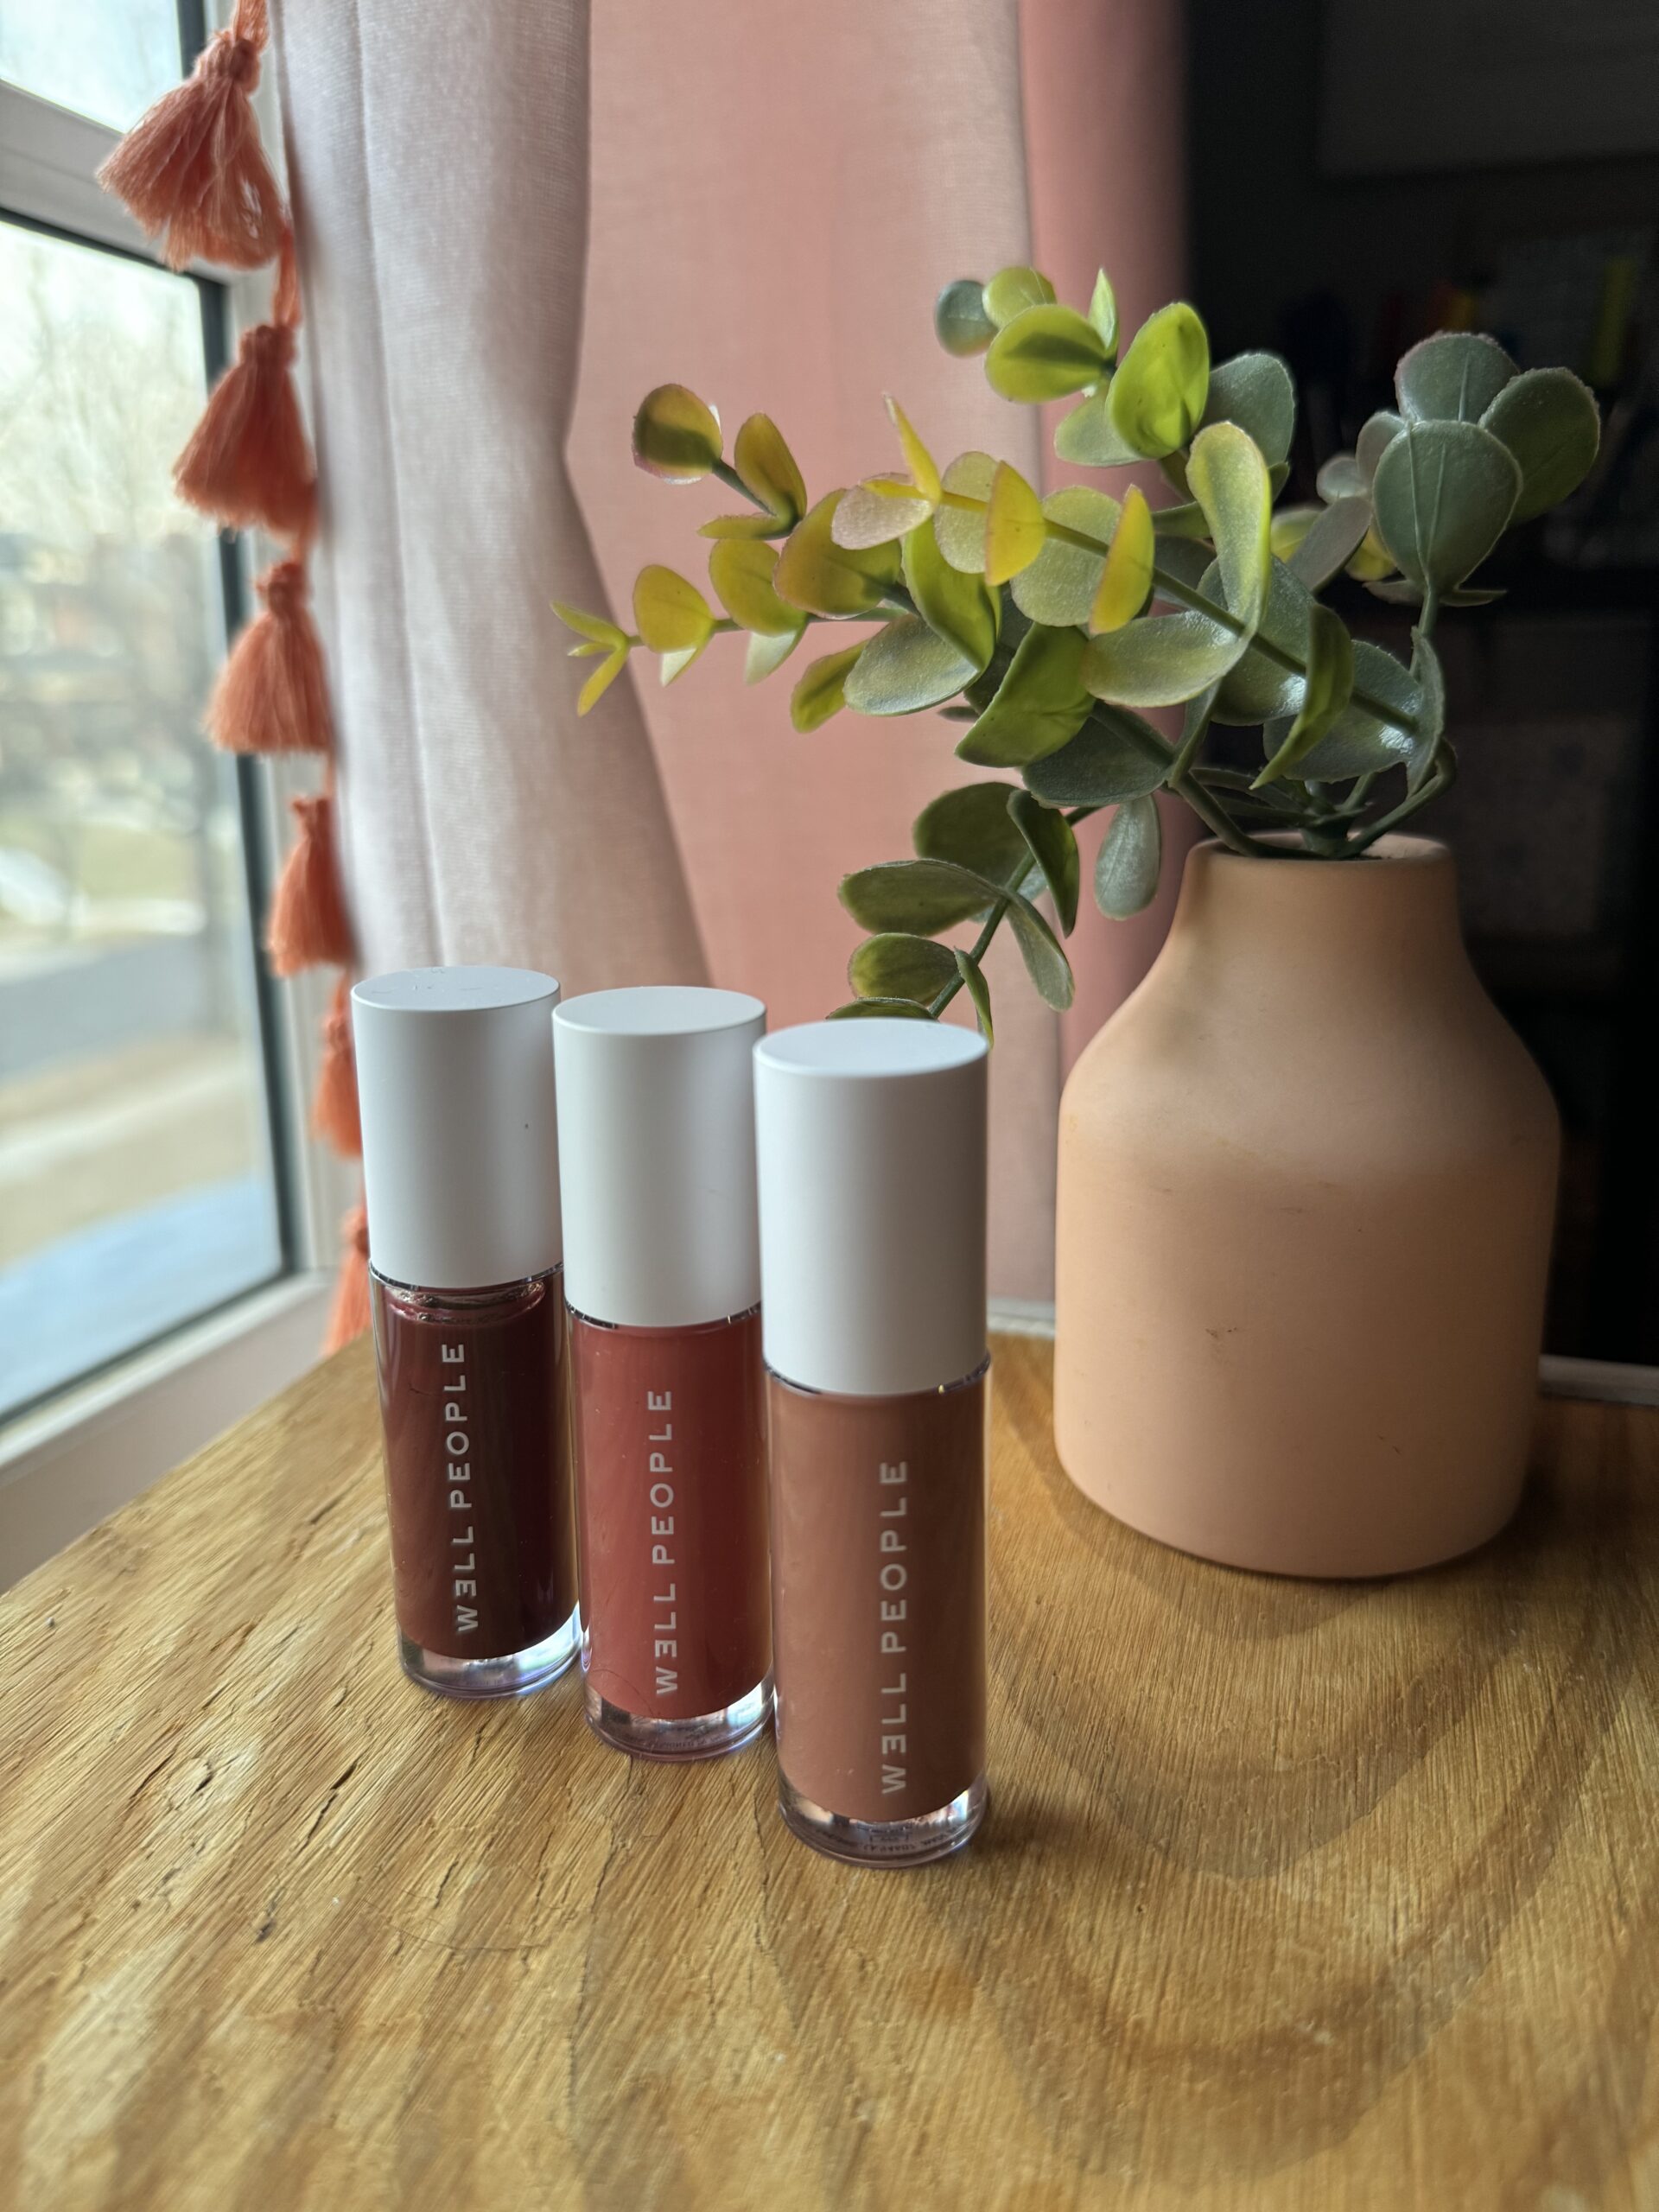 Three lip glosses sitting on a table next to a plant.